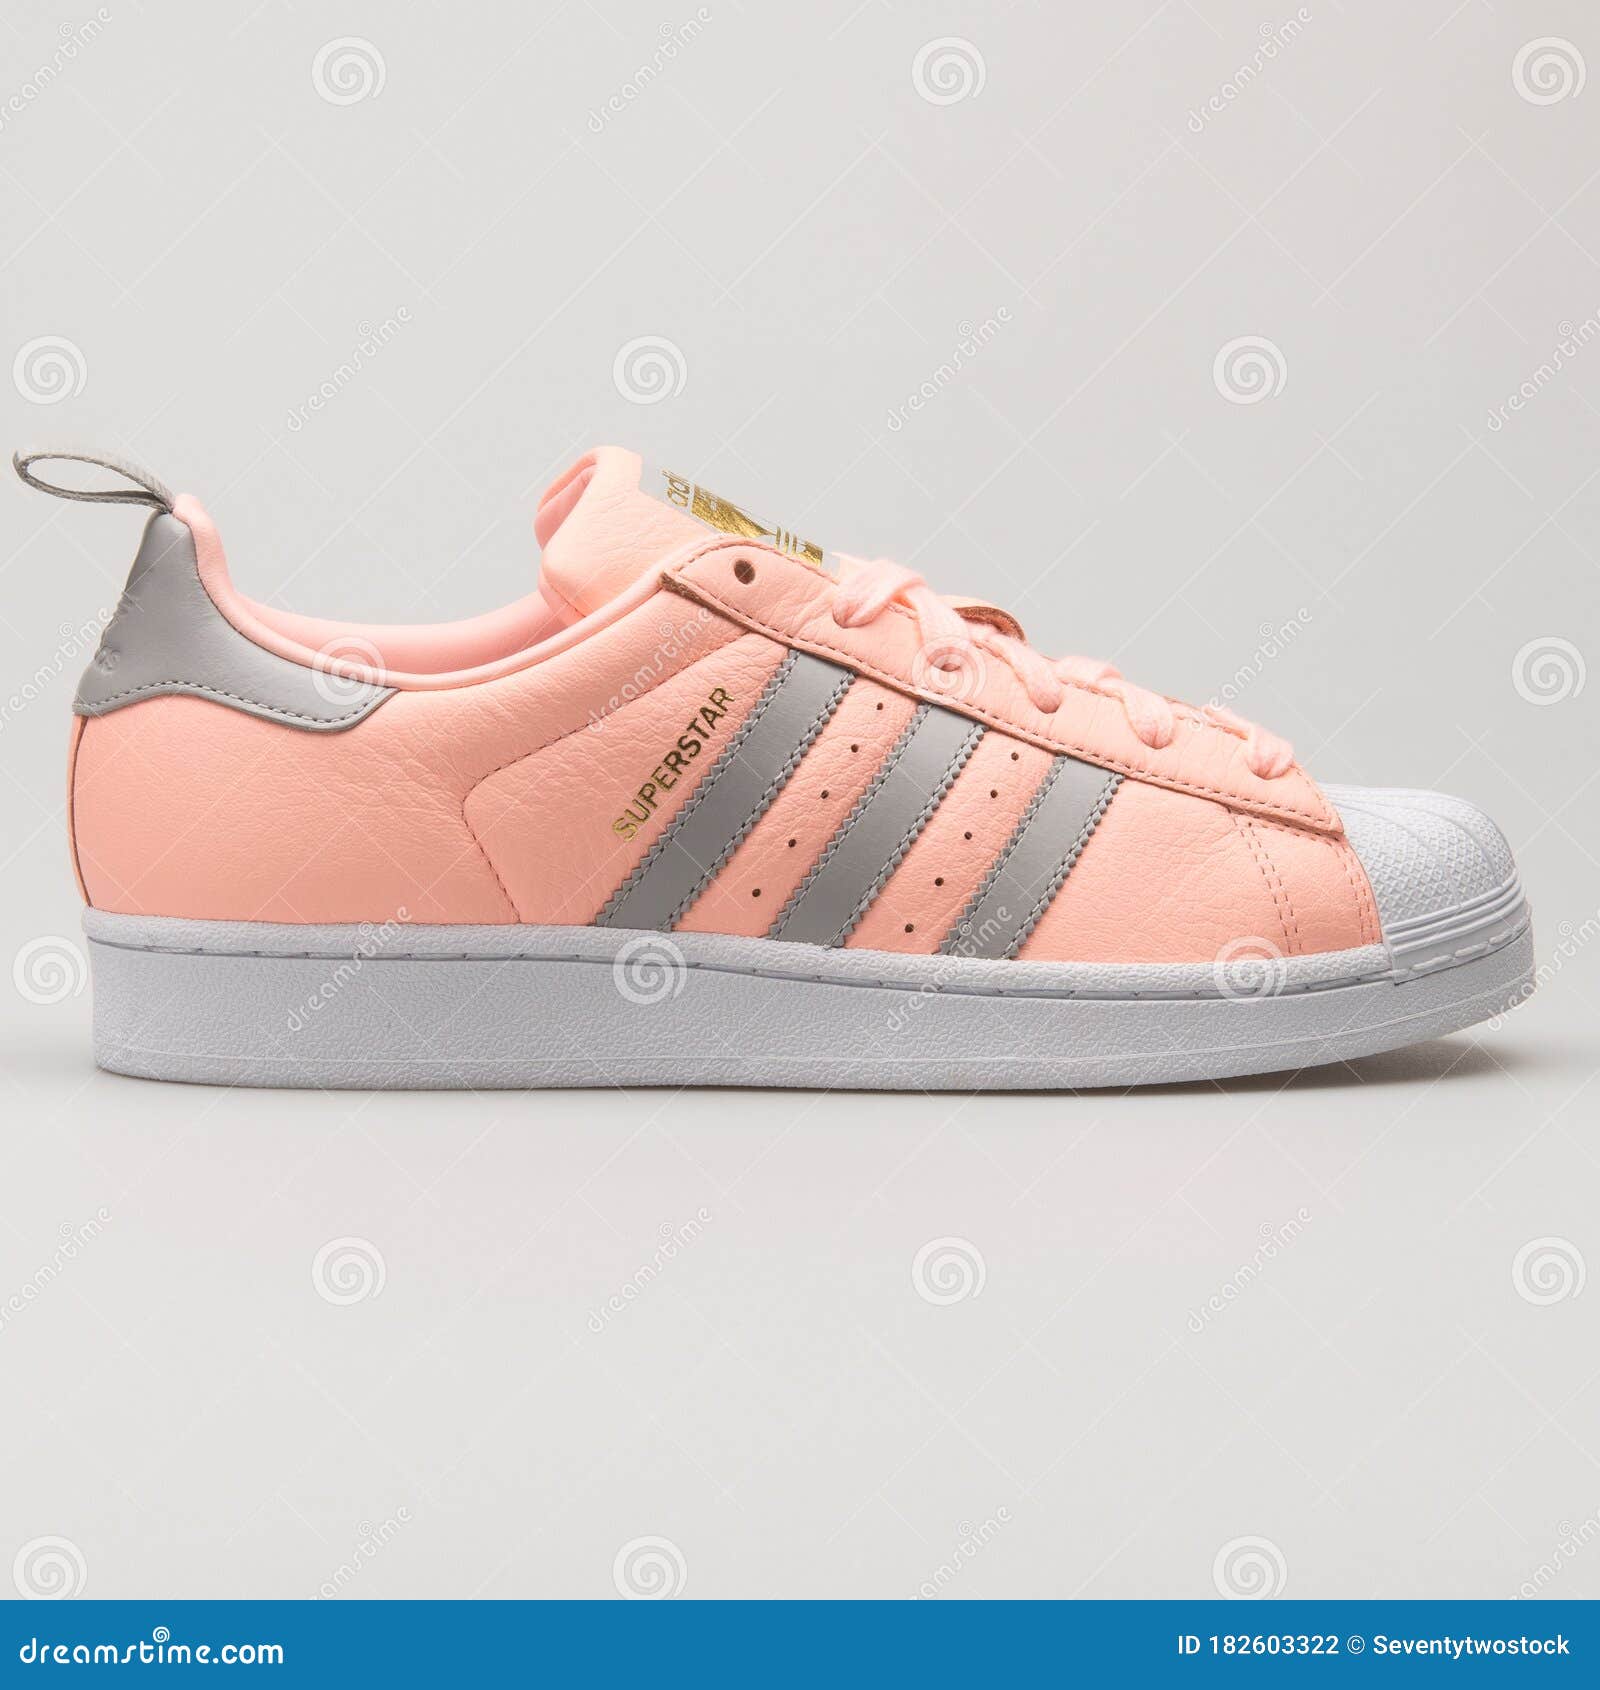 kleermaker poll Pijler Adidas Superstar Rose, Gold, Grey and White Sneaker Editorial Photography -  Image of background, equipment: 182603322